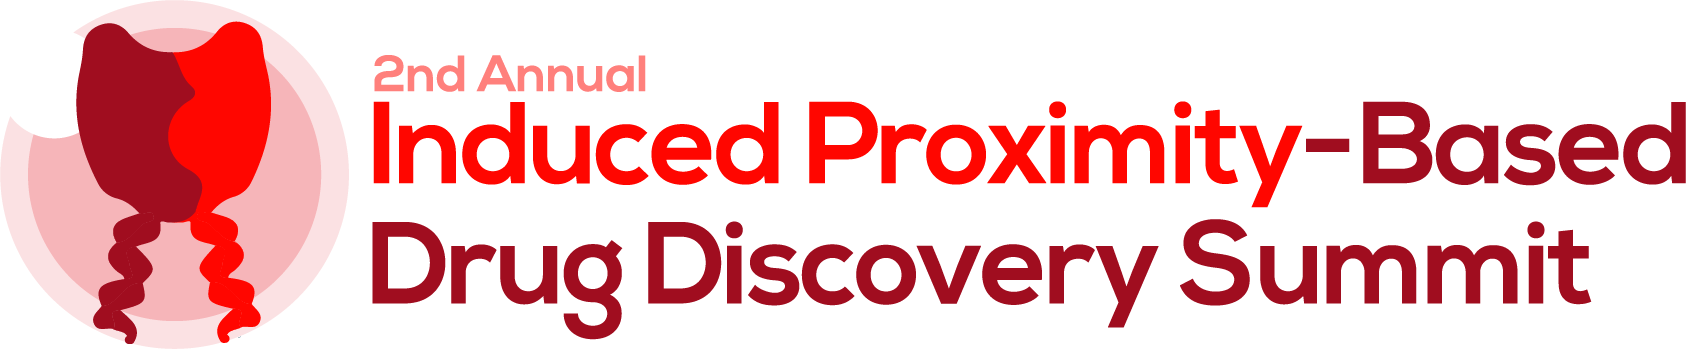 Updated red logo